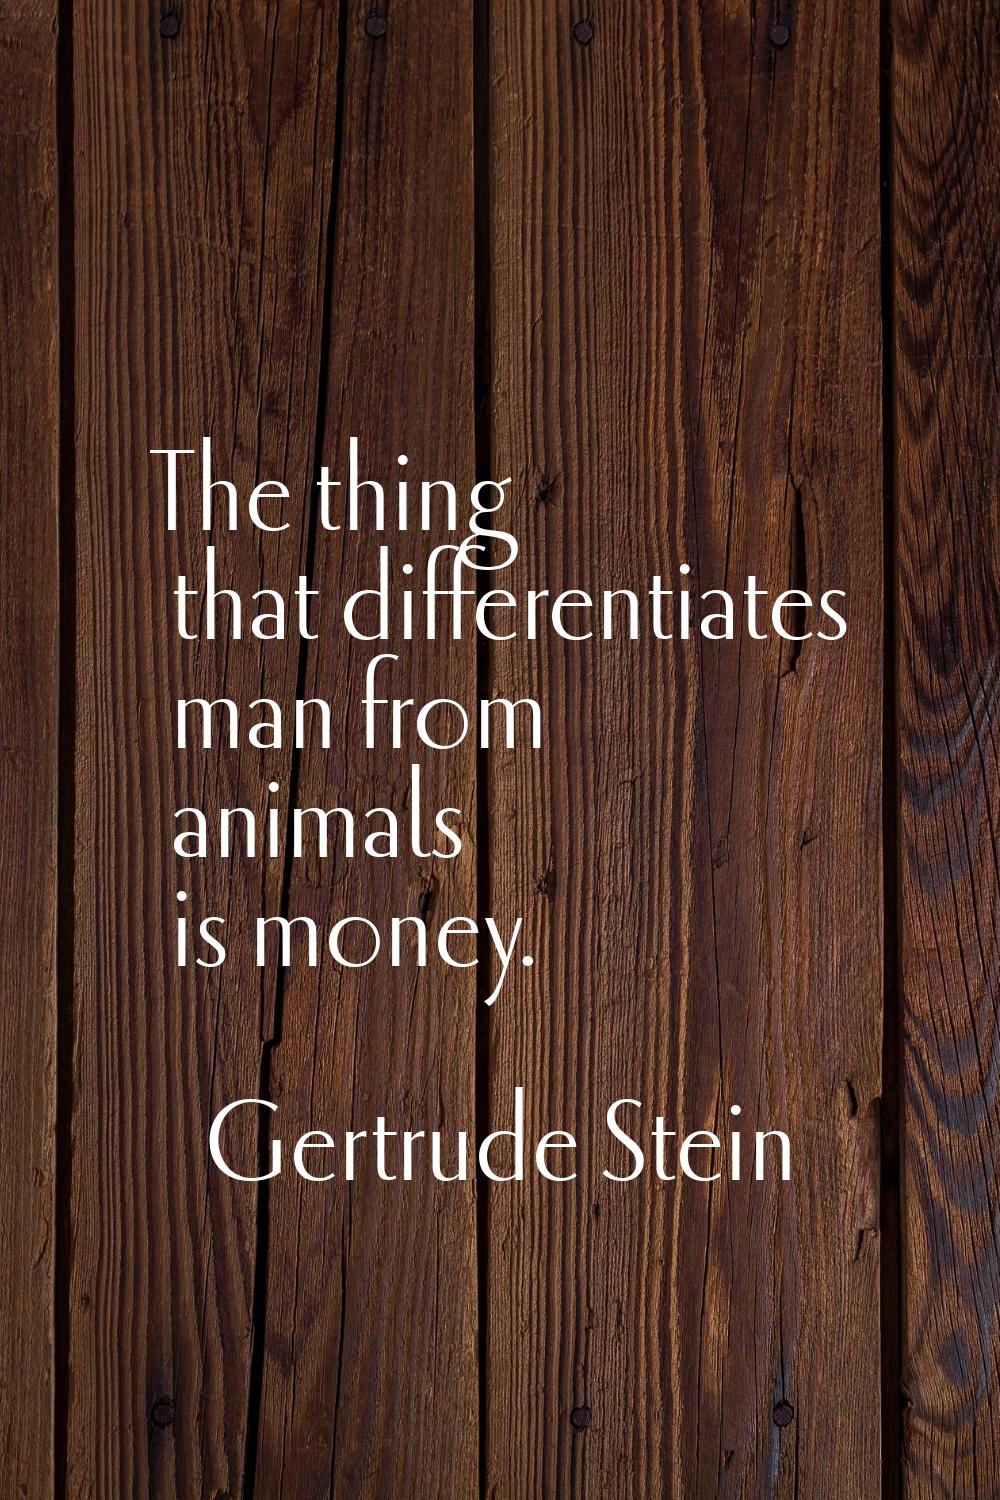 The thing that differentiates man from animals is money.